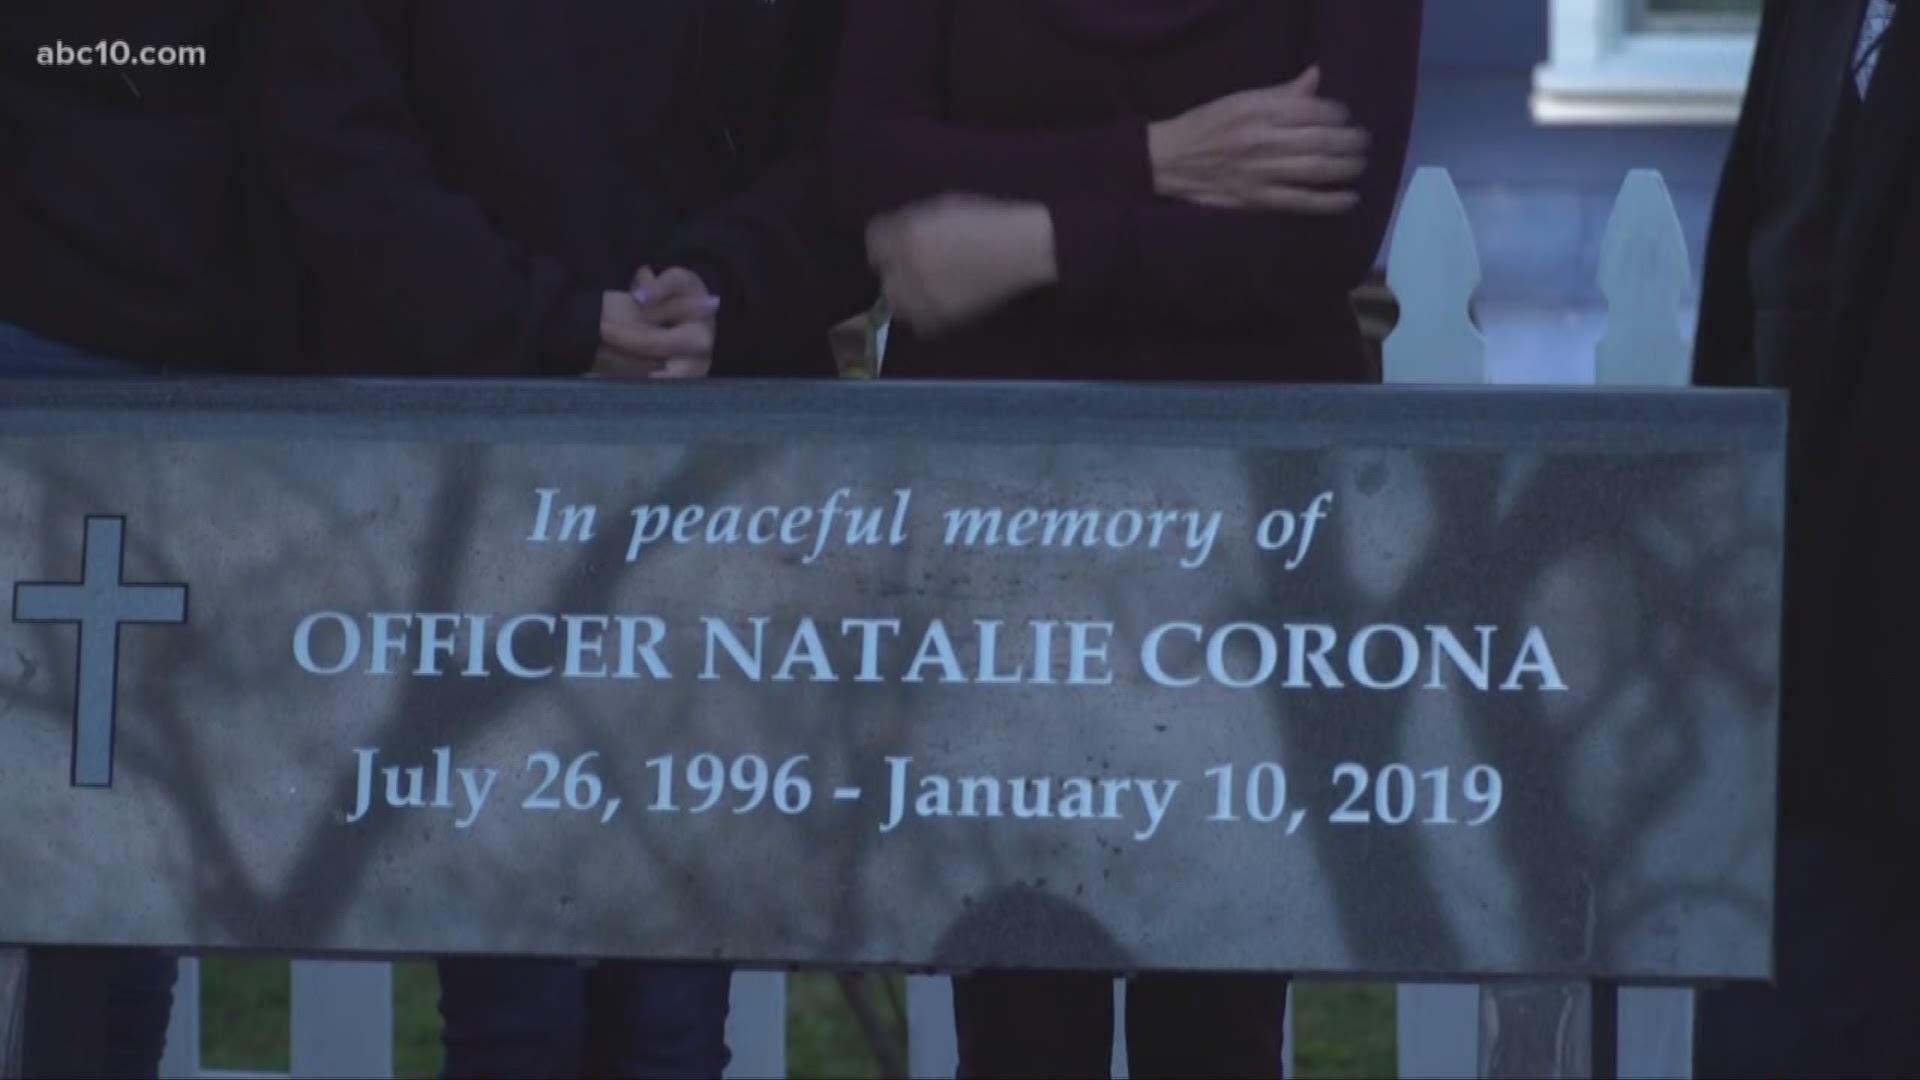 Davis Police Officer Natalie Corona was killed in the line of duty on Jan. 10, 2019. The police department unveiled a bench a year later to honor Corona's memory.